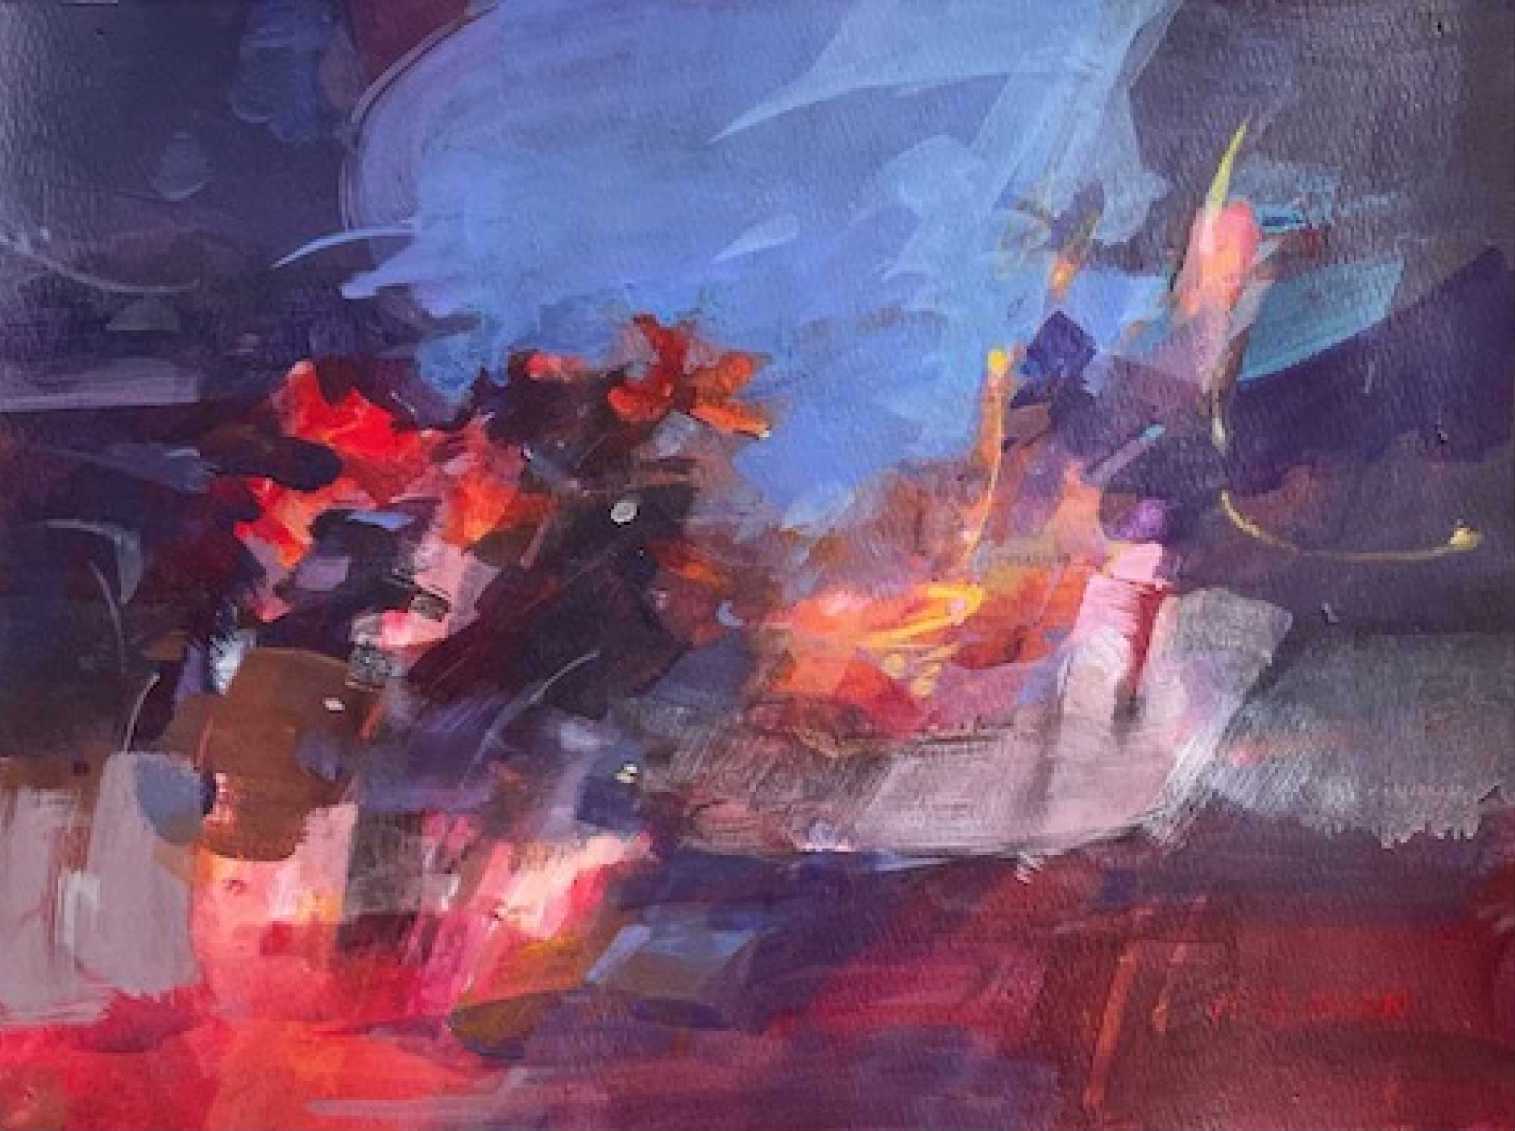 an abstract painting in blue, red, and pink